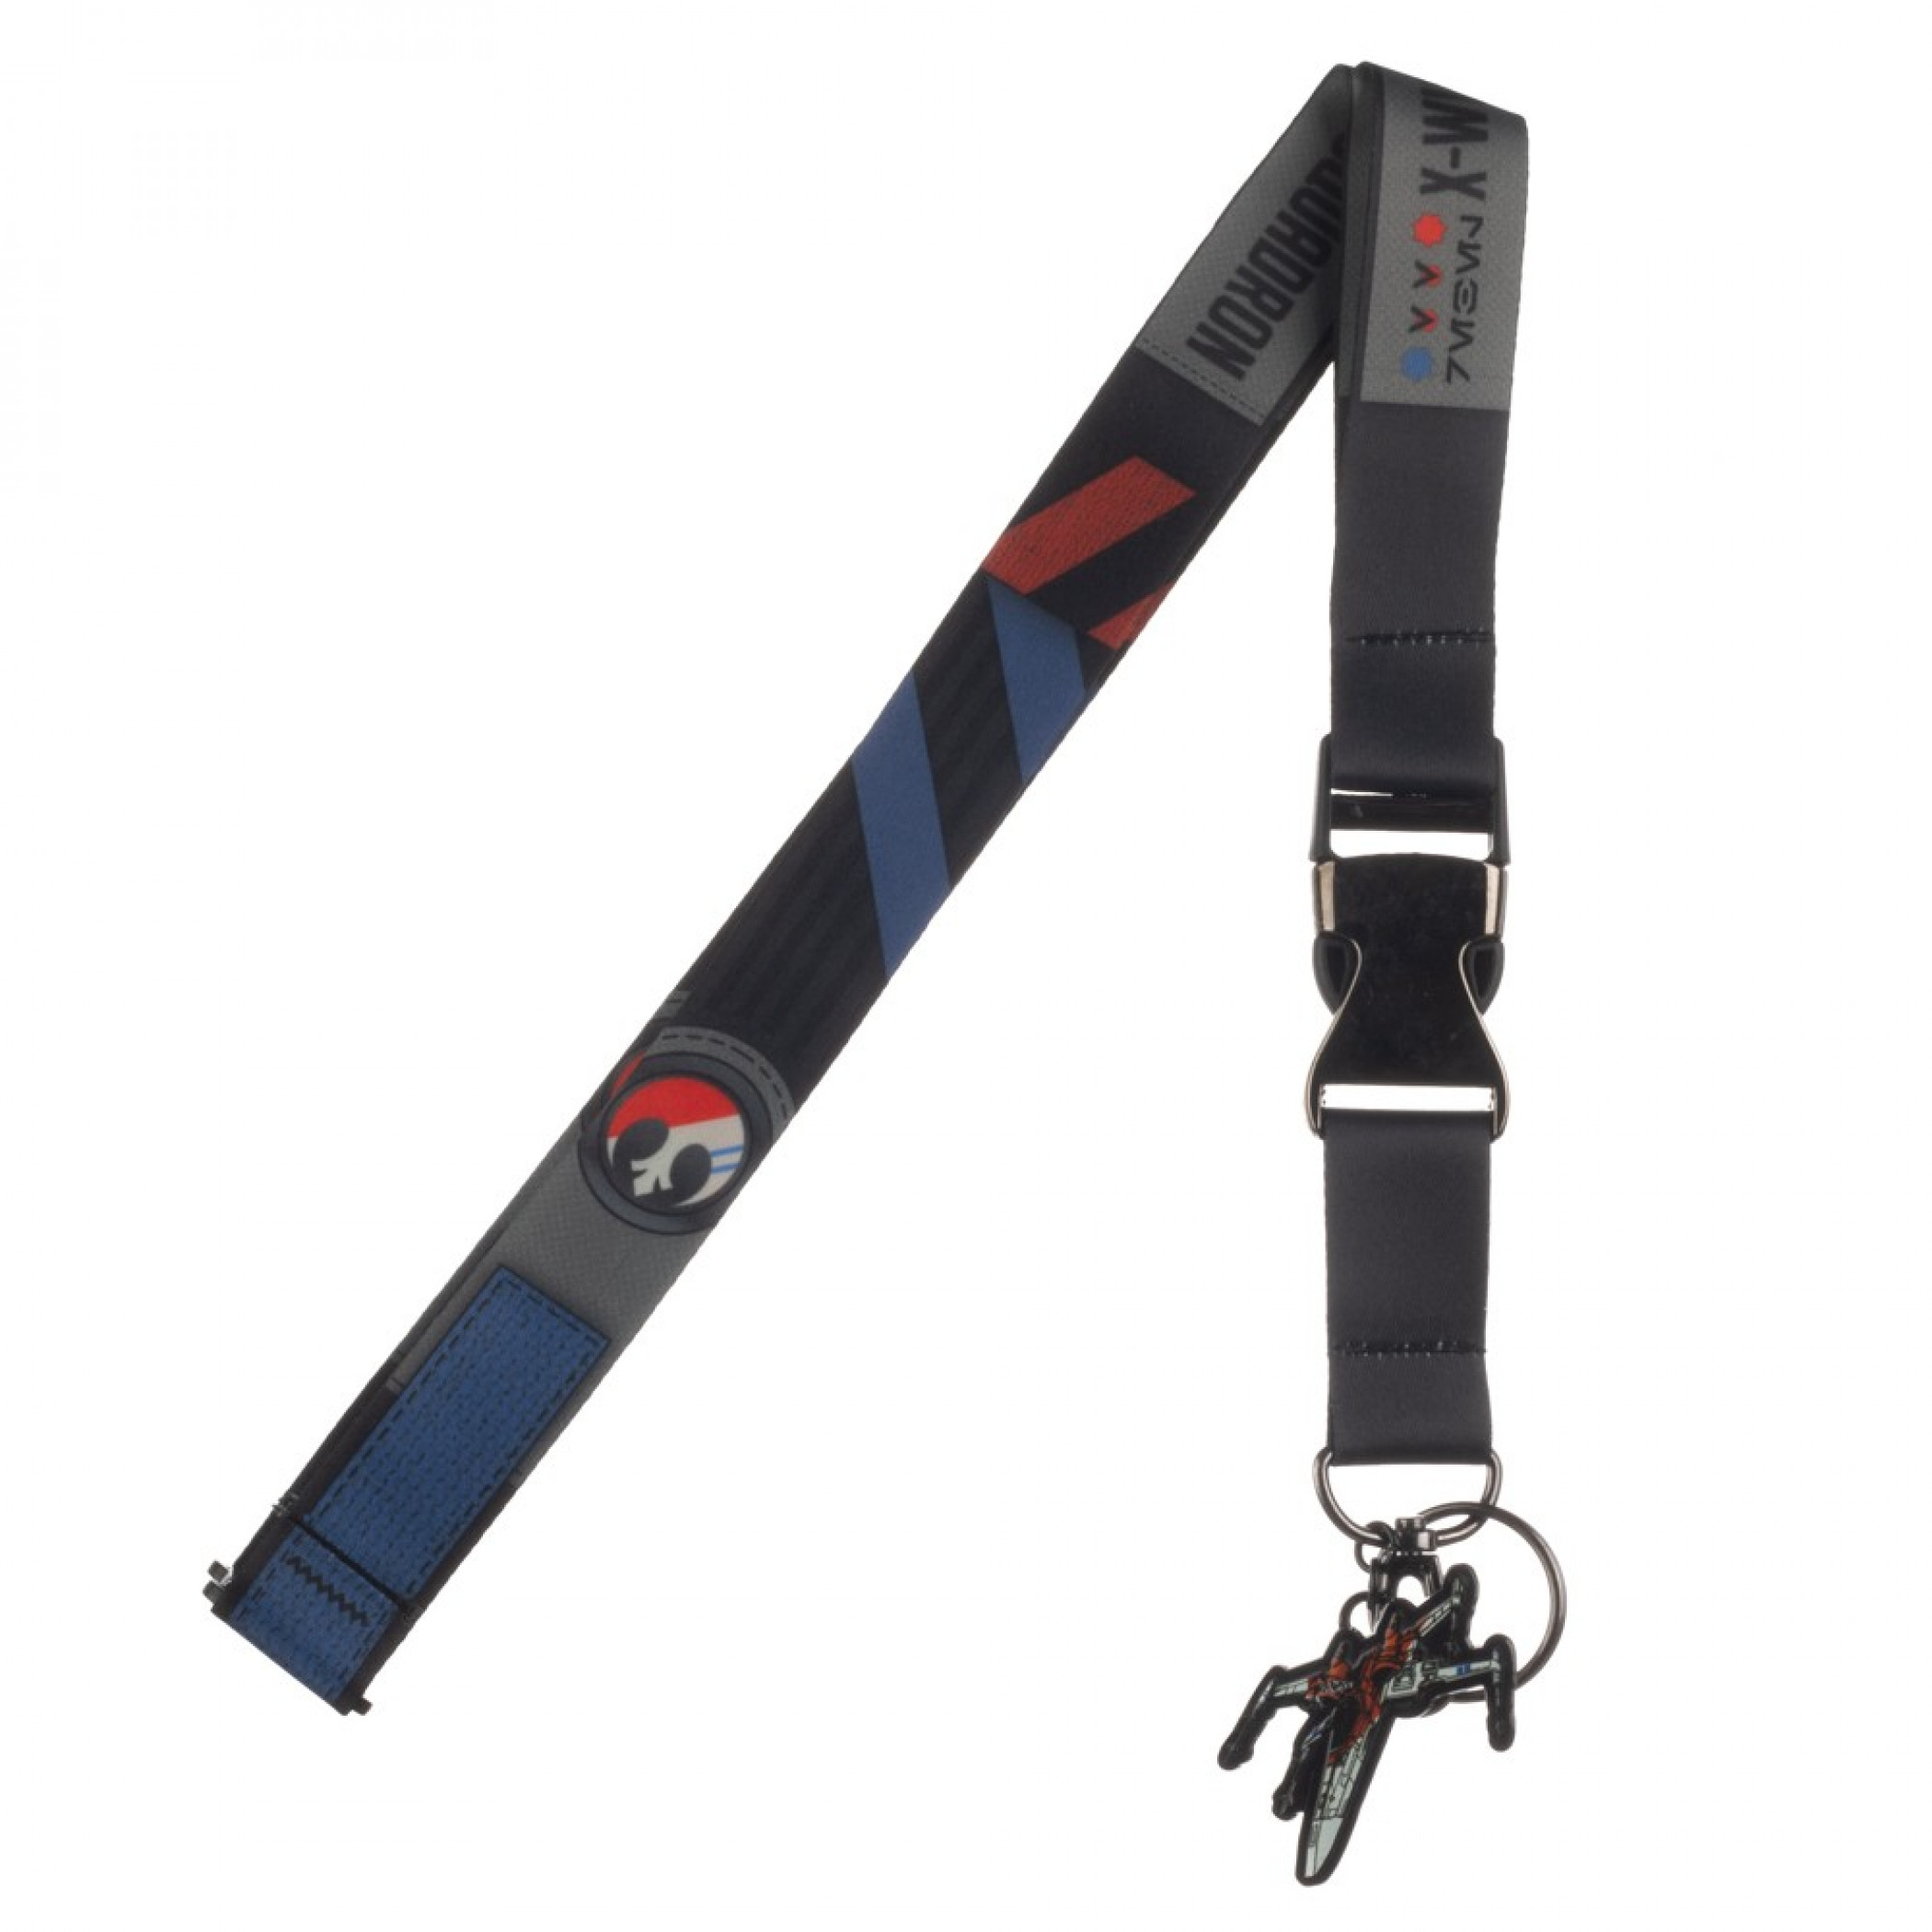 Star Wars Episode 9 X-Wing Fighter Suit Up Lanyard